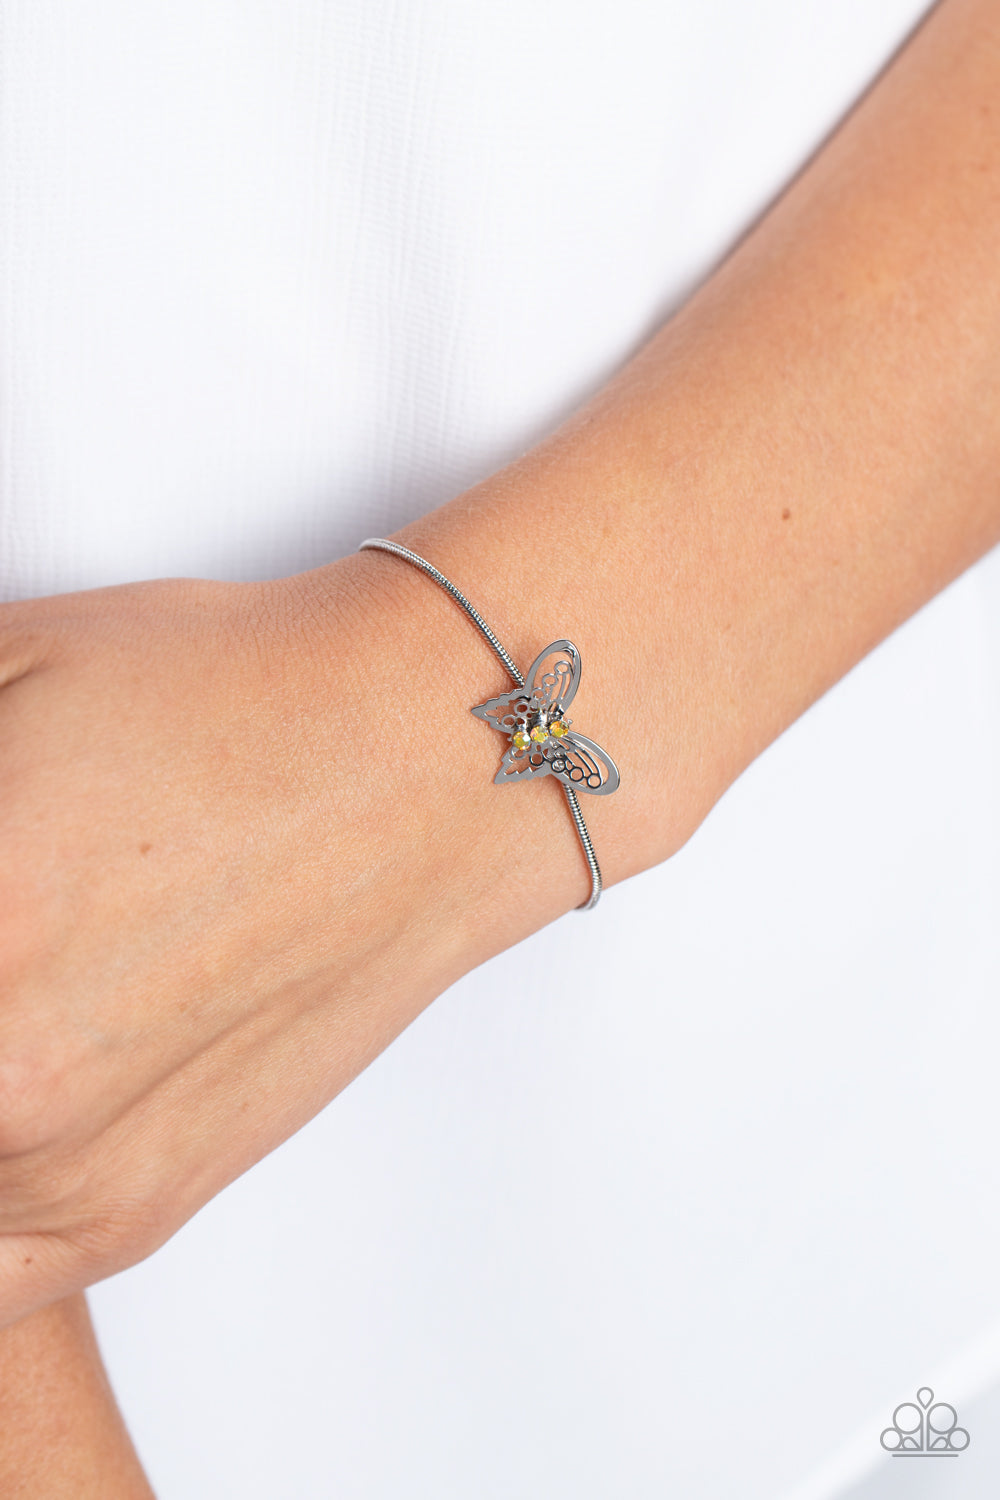 Paparazzi Accessories Wings of Wonder - Yellow A deceptively simple silver butterfly charm glides along a silver snake chain for a whimsical flair along the wrist. Dainty, yellow rhinestones, brushed in a UV shimmer, encrust along the butterfly's body, cr